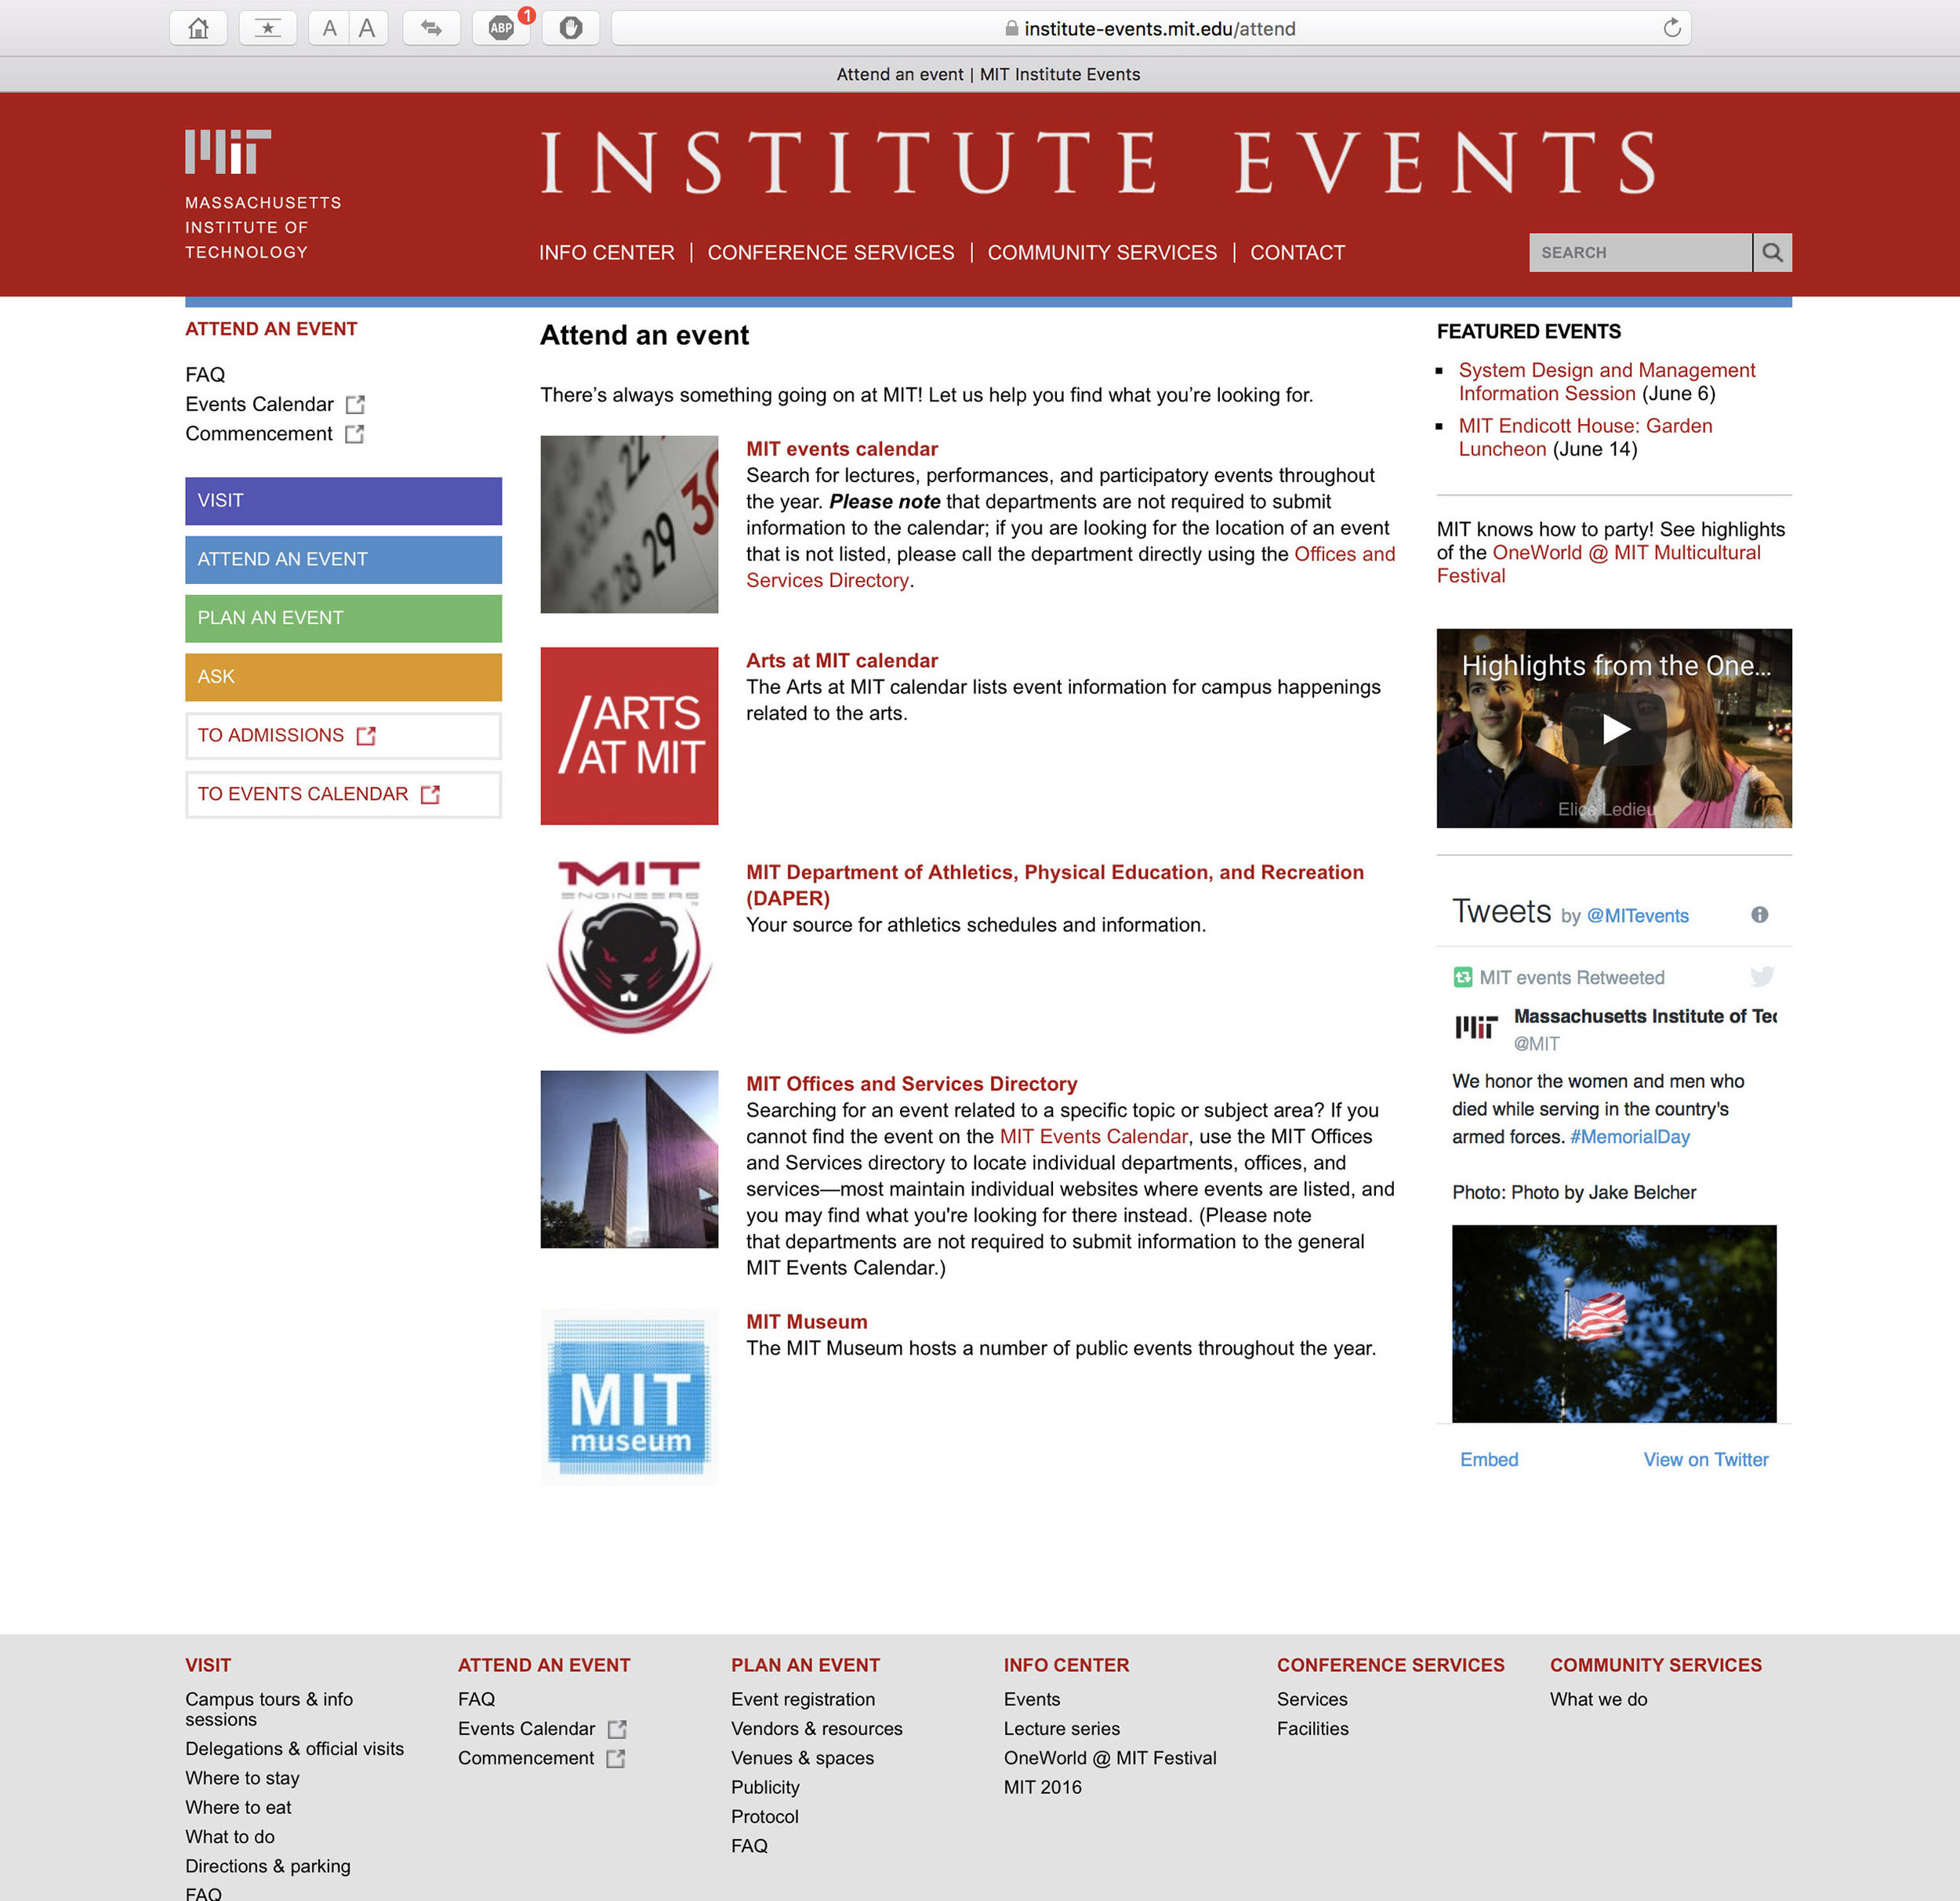 MIT Institute Events, 2nd level page